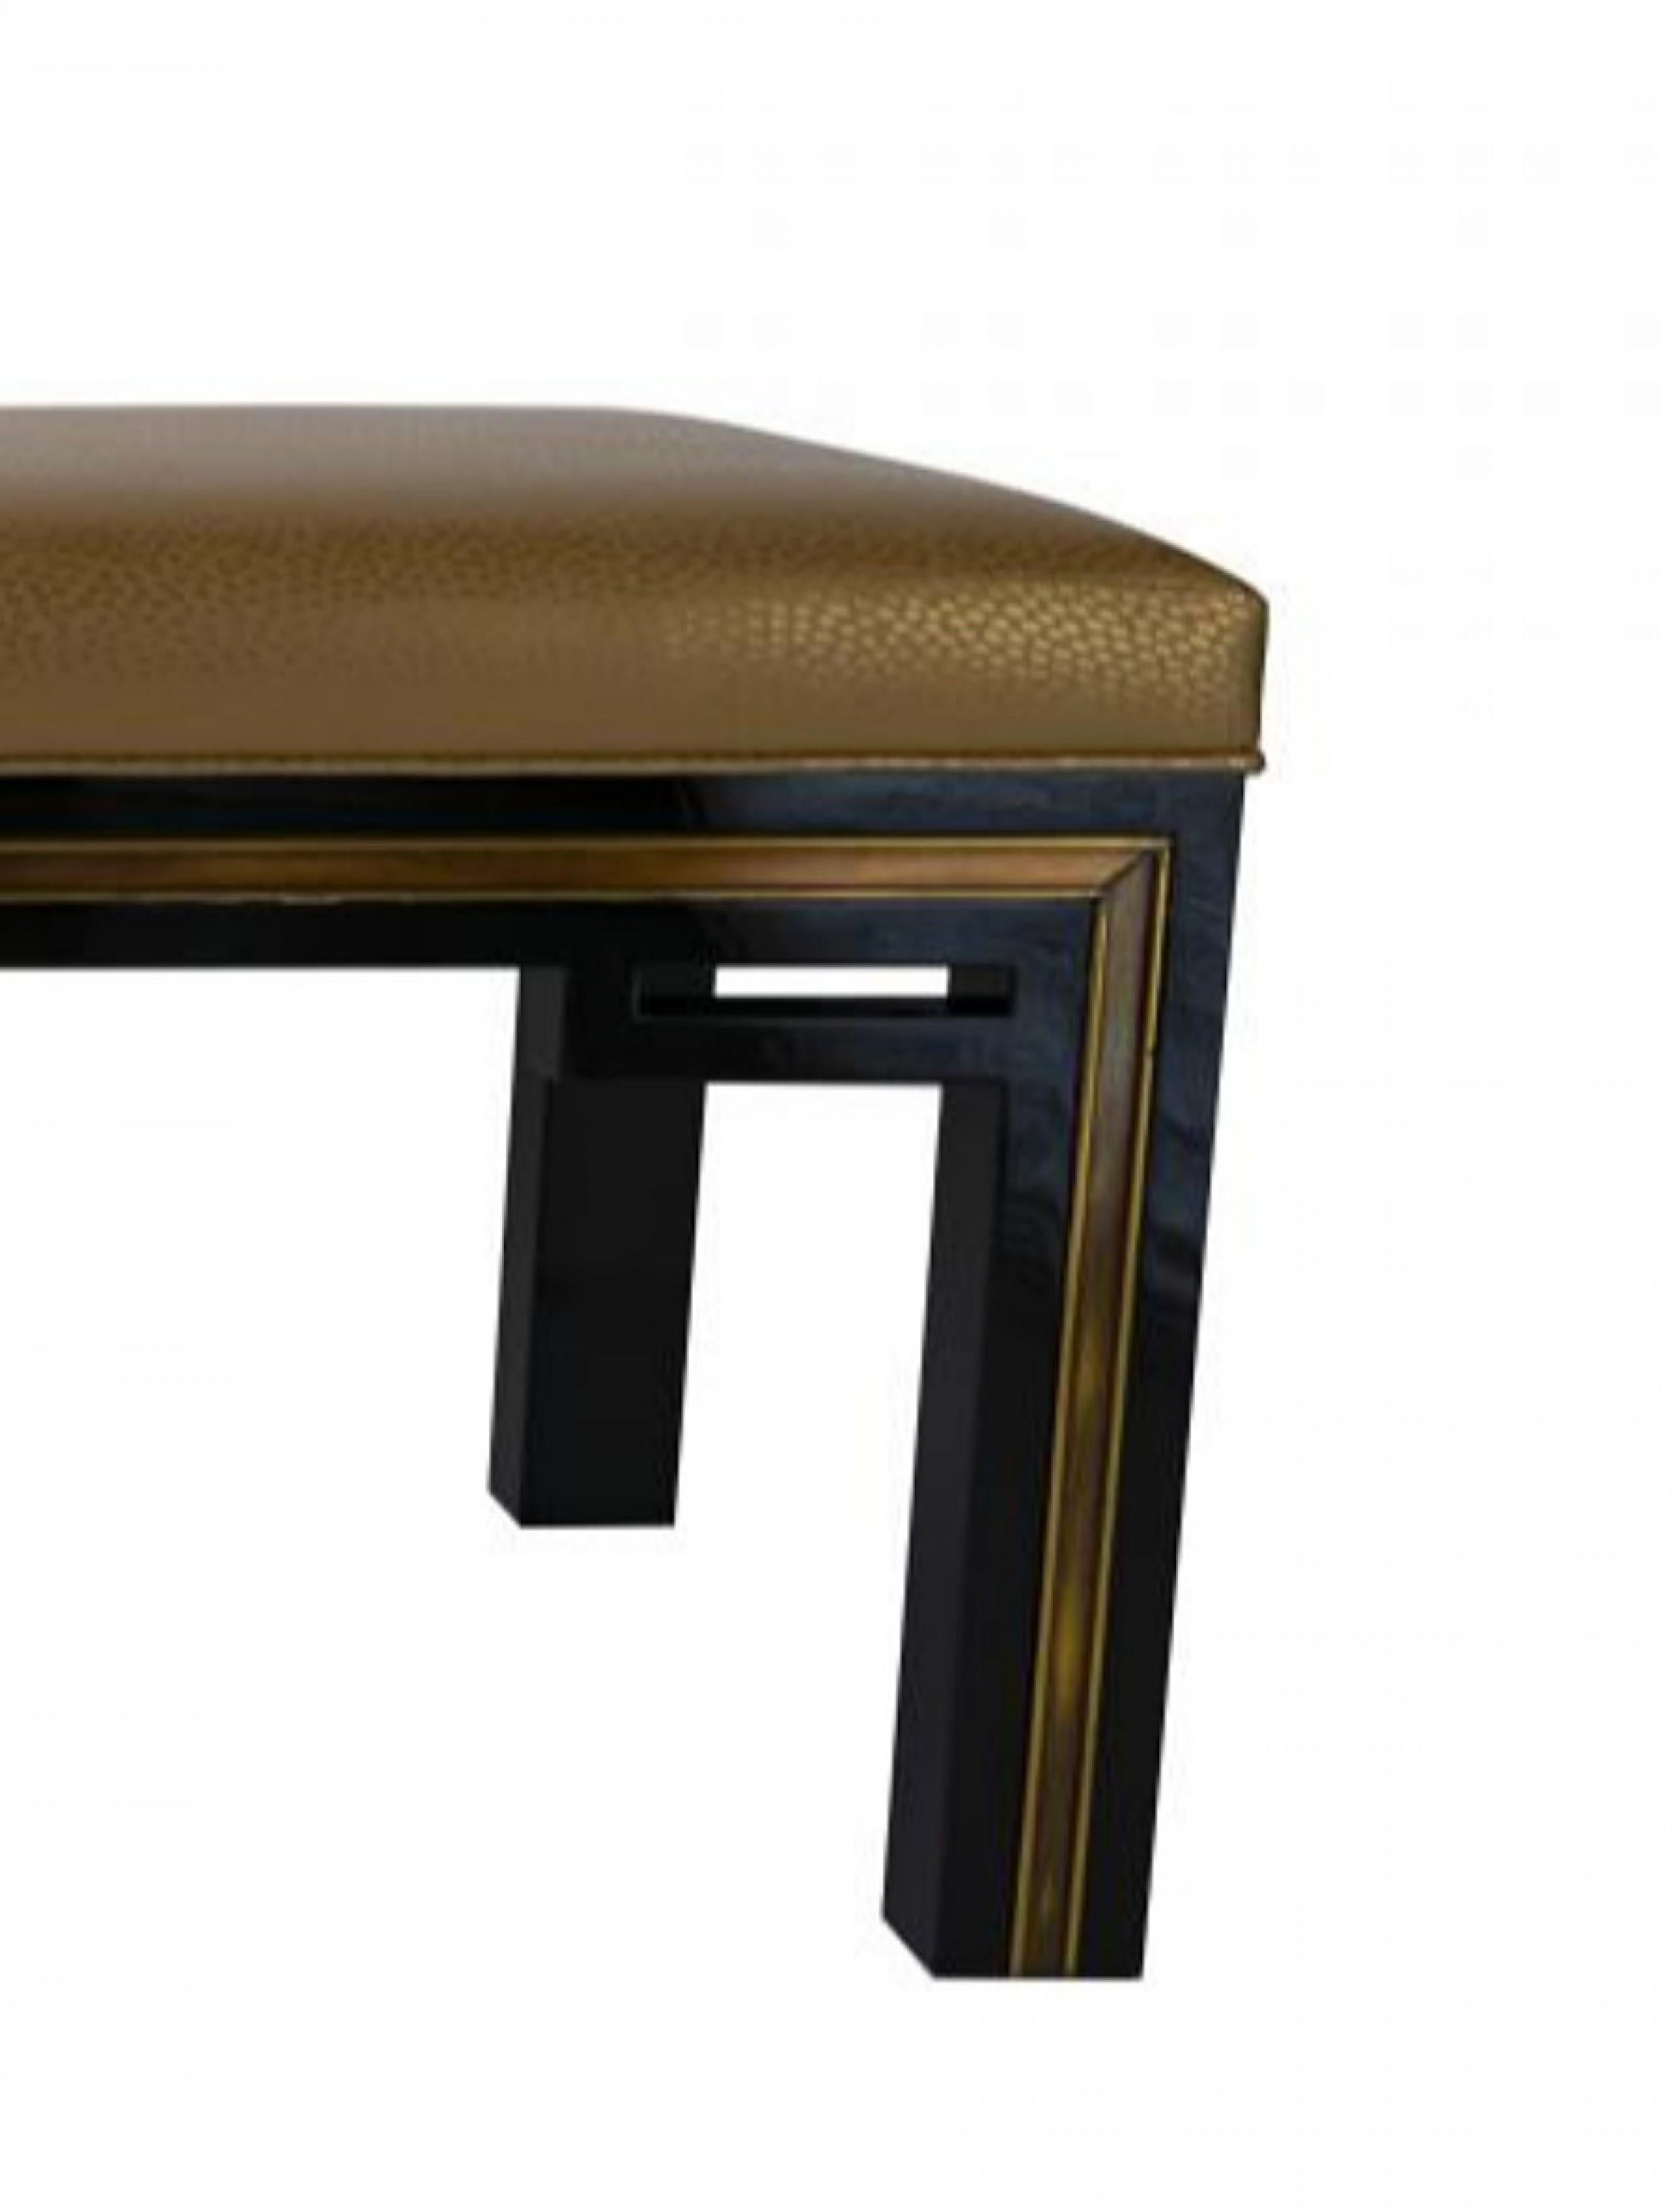 French Modern Black Lacquer Bench, Jacques Quinet For Sale 2